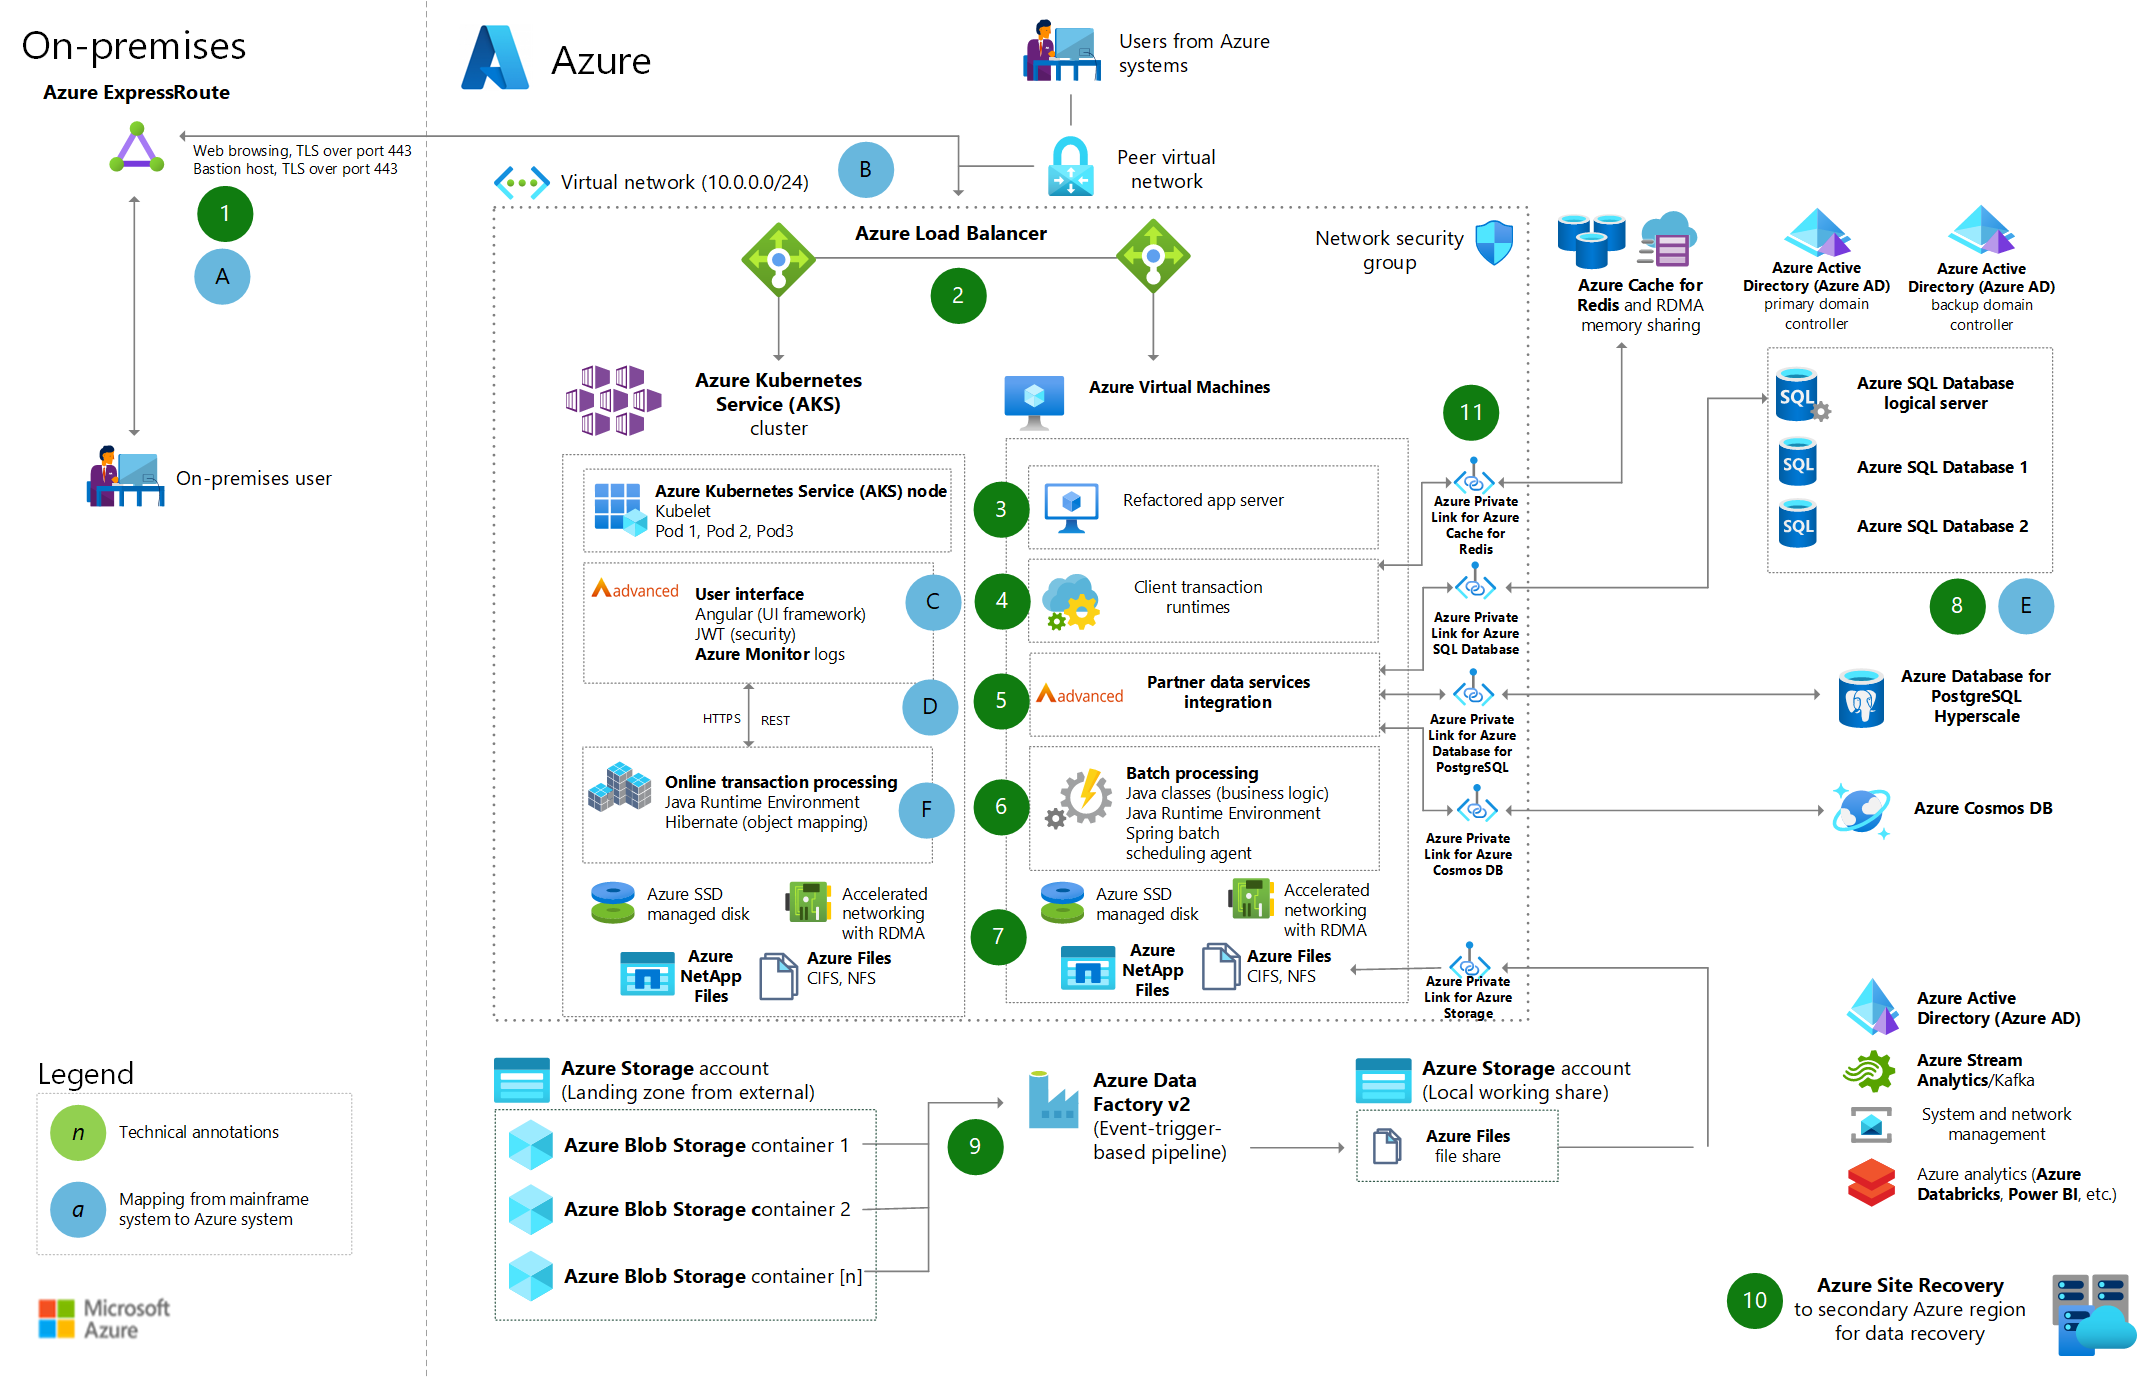 Architecture diagram that shows the system on Azure after refactoring.